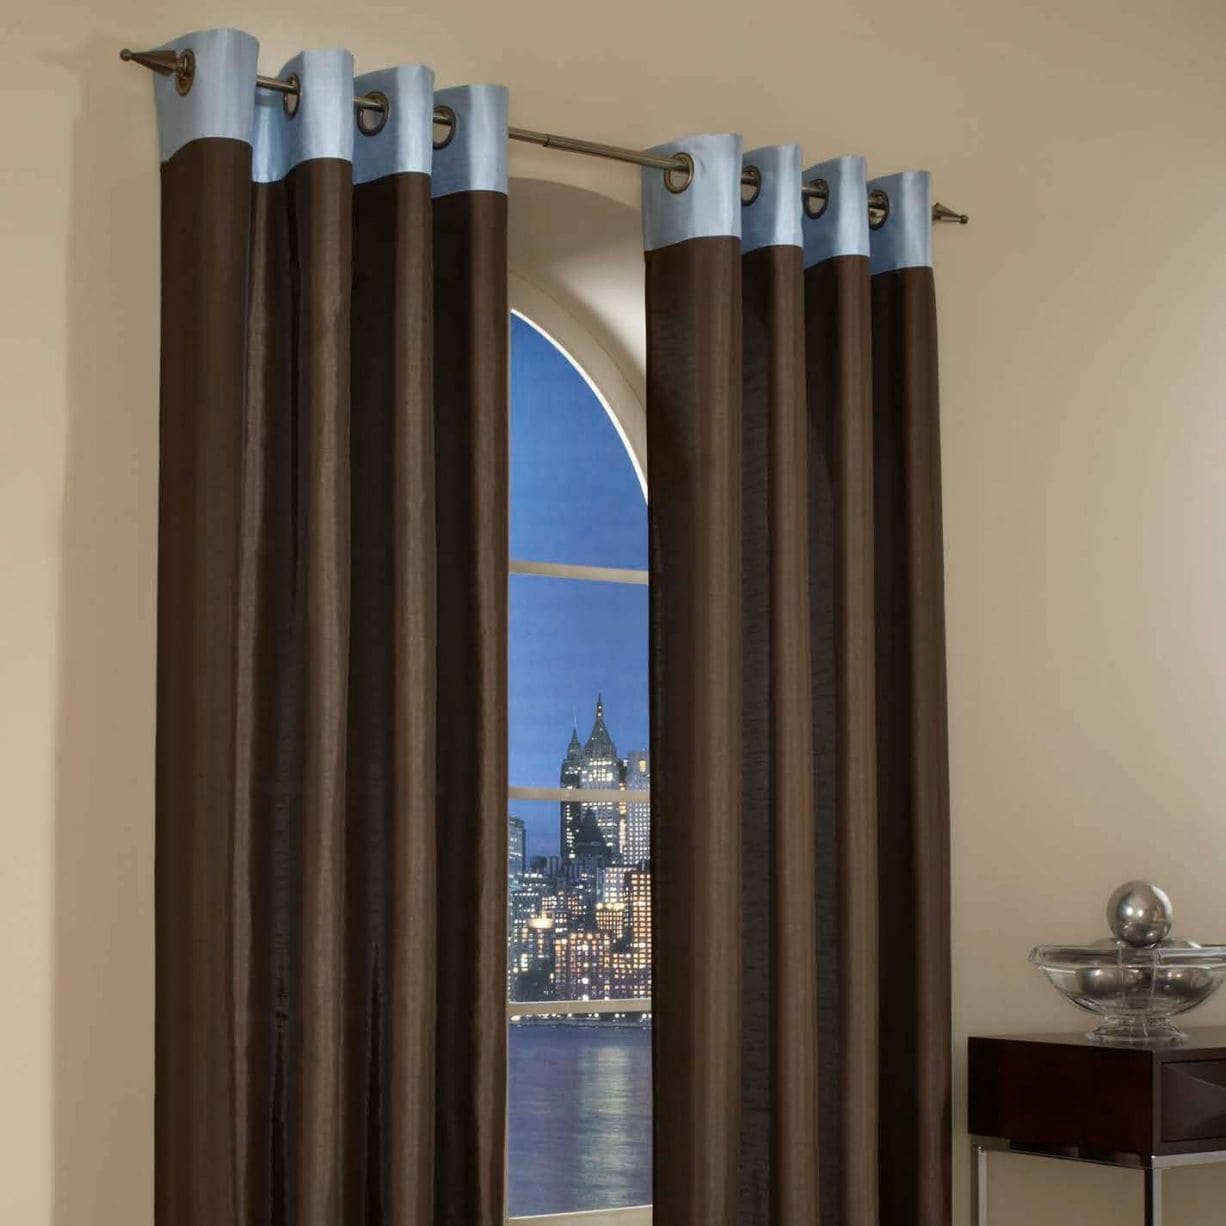 Curtains on grommets